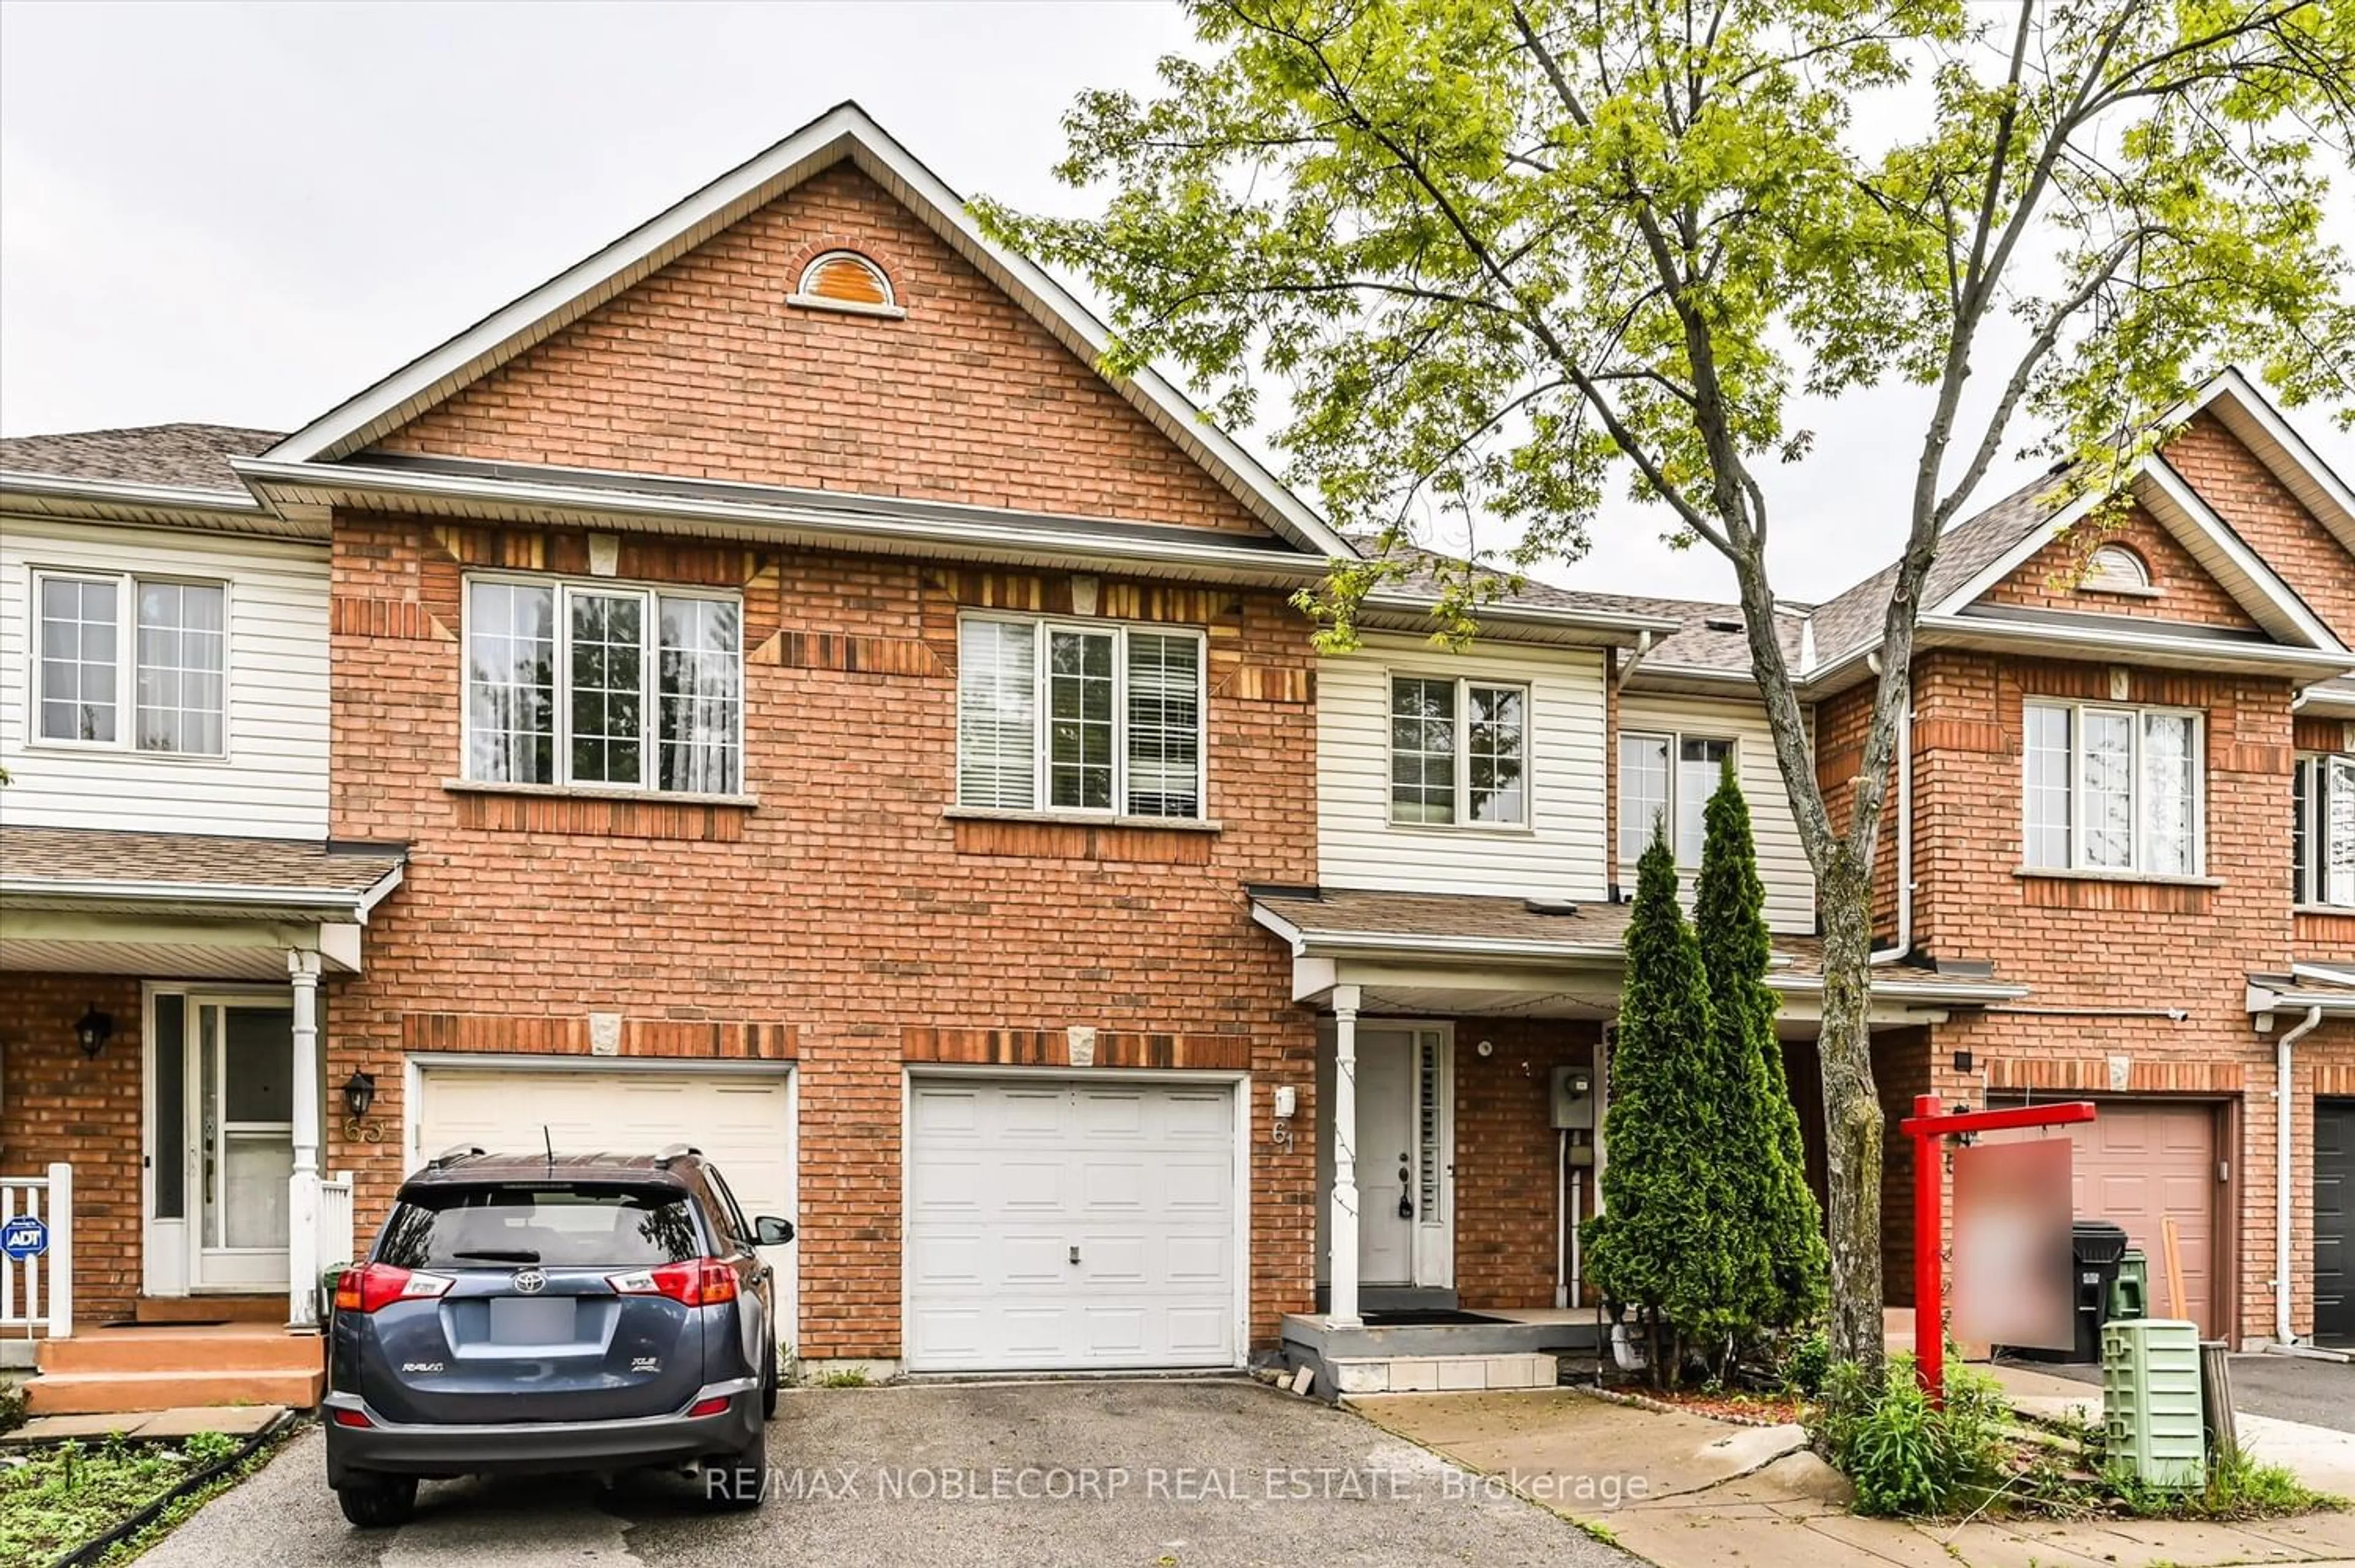 Home with brick exterior material for 61 Triple Crown Ave, Toronto Ontario M9W 7E3